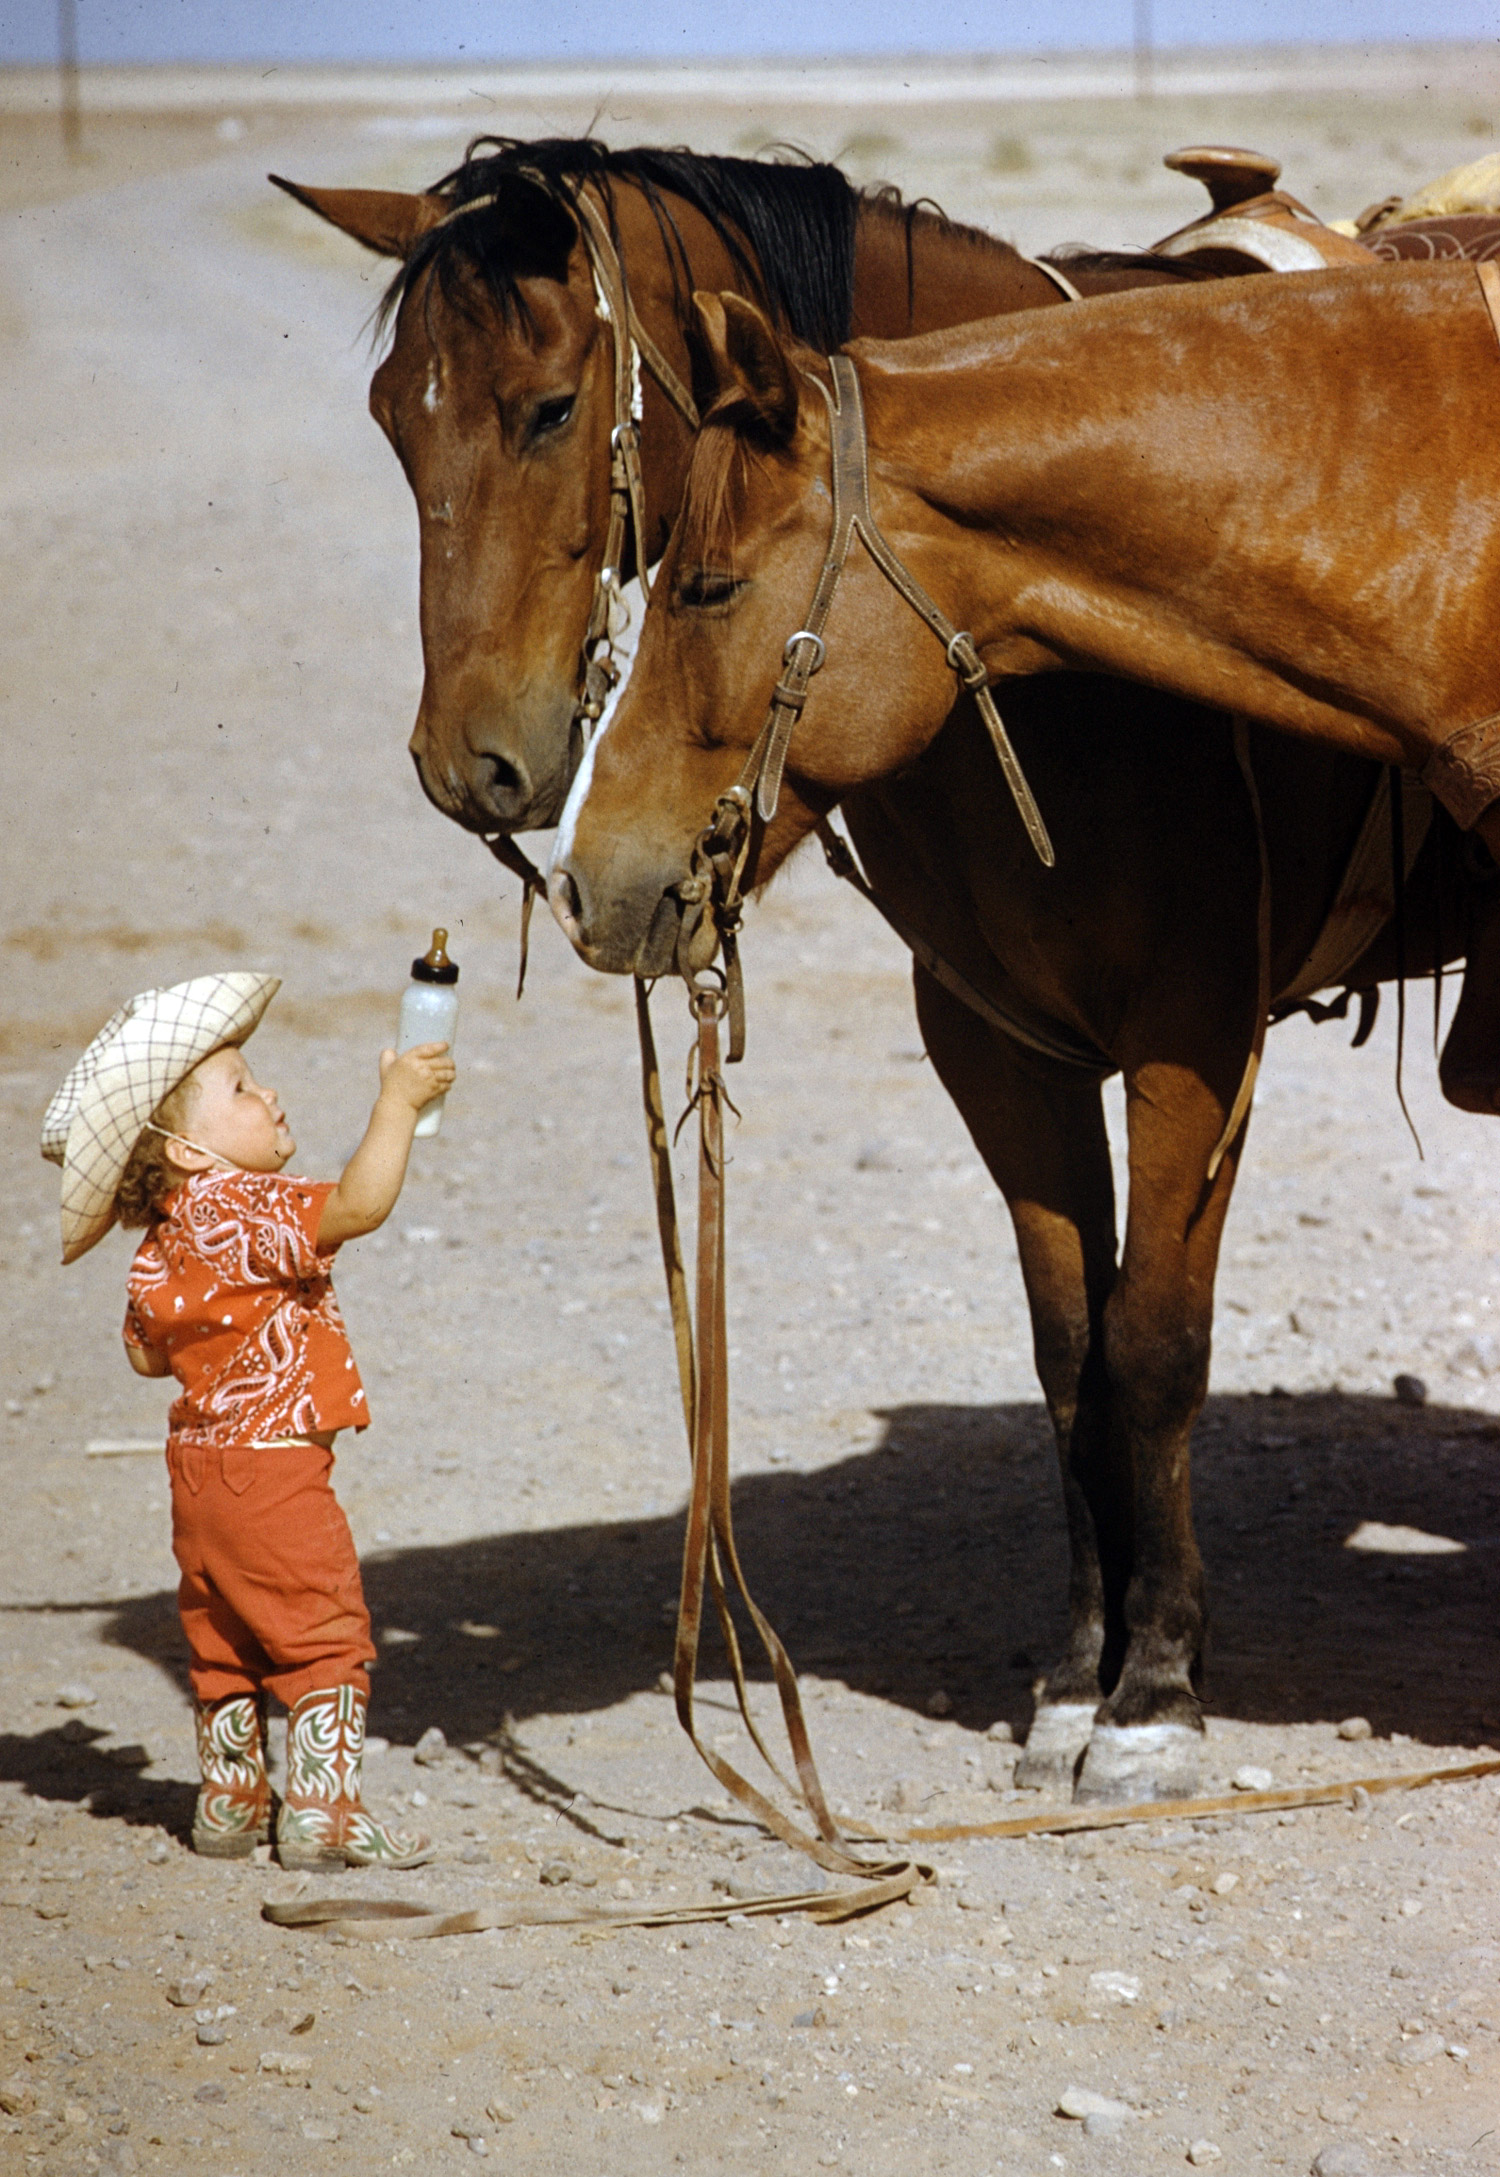 The Youngest Cowgirl in 1955